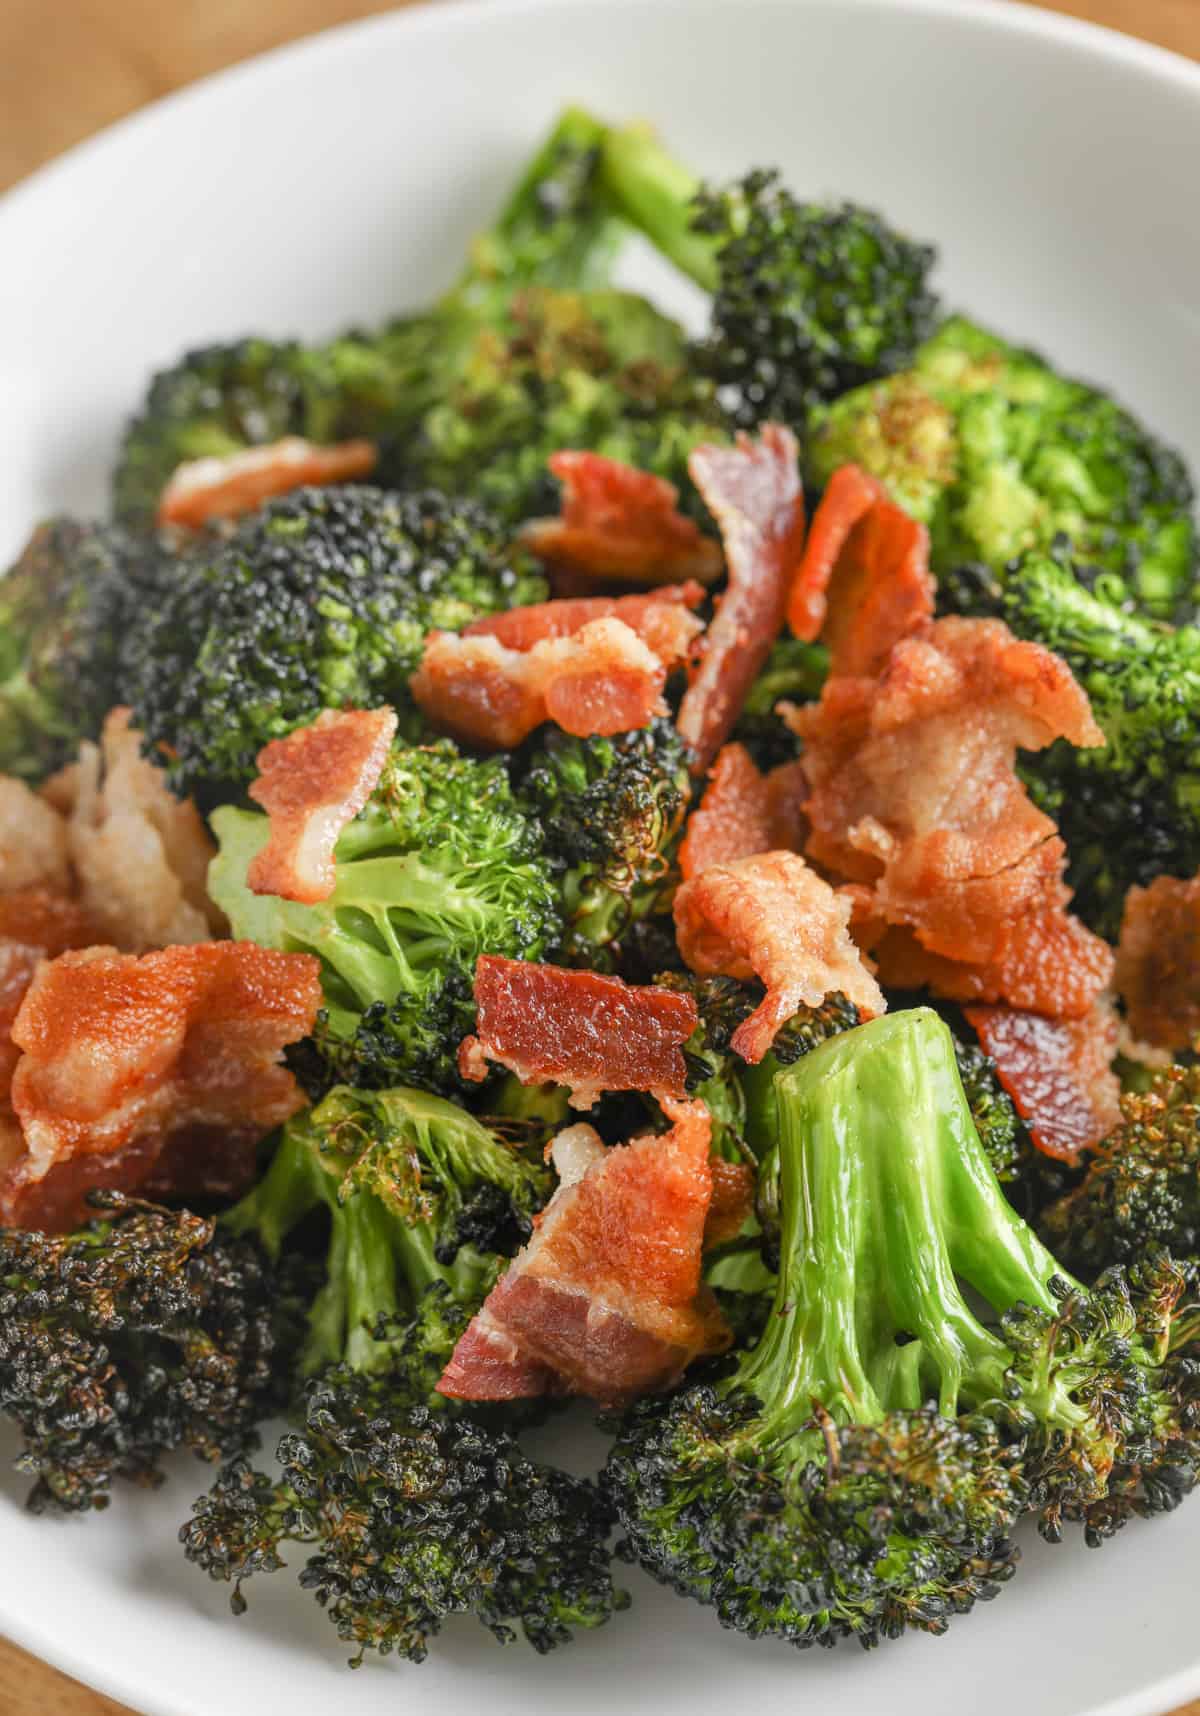 Bacon and broccoli in the air fryer